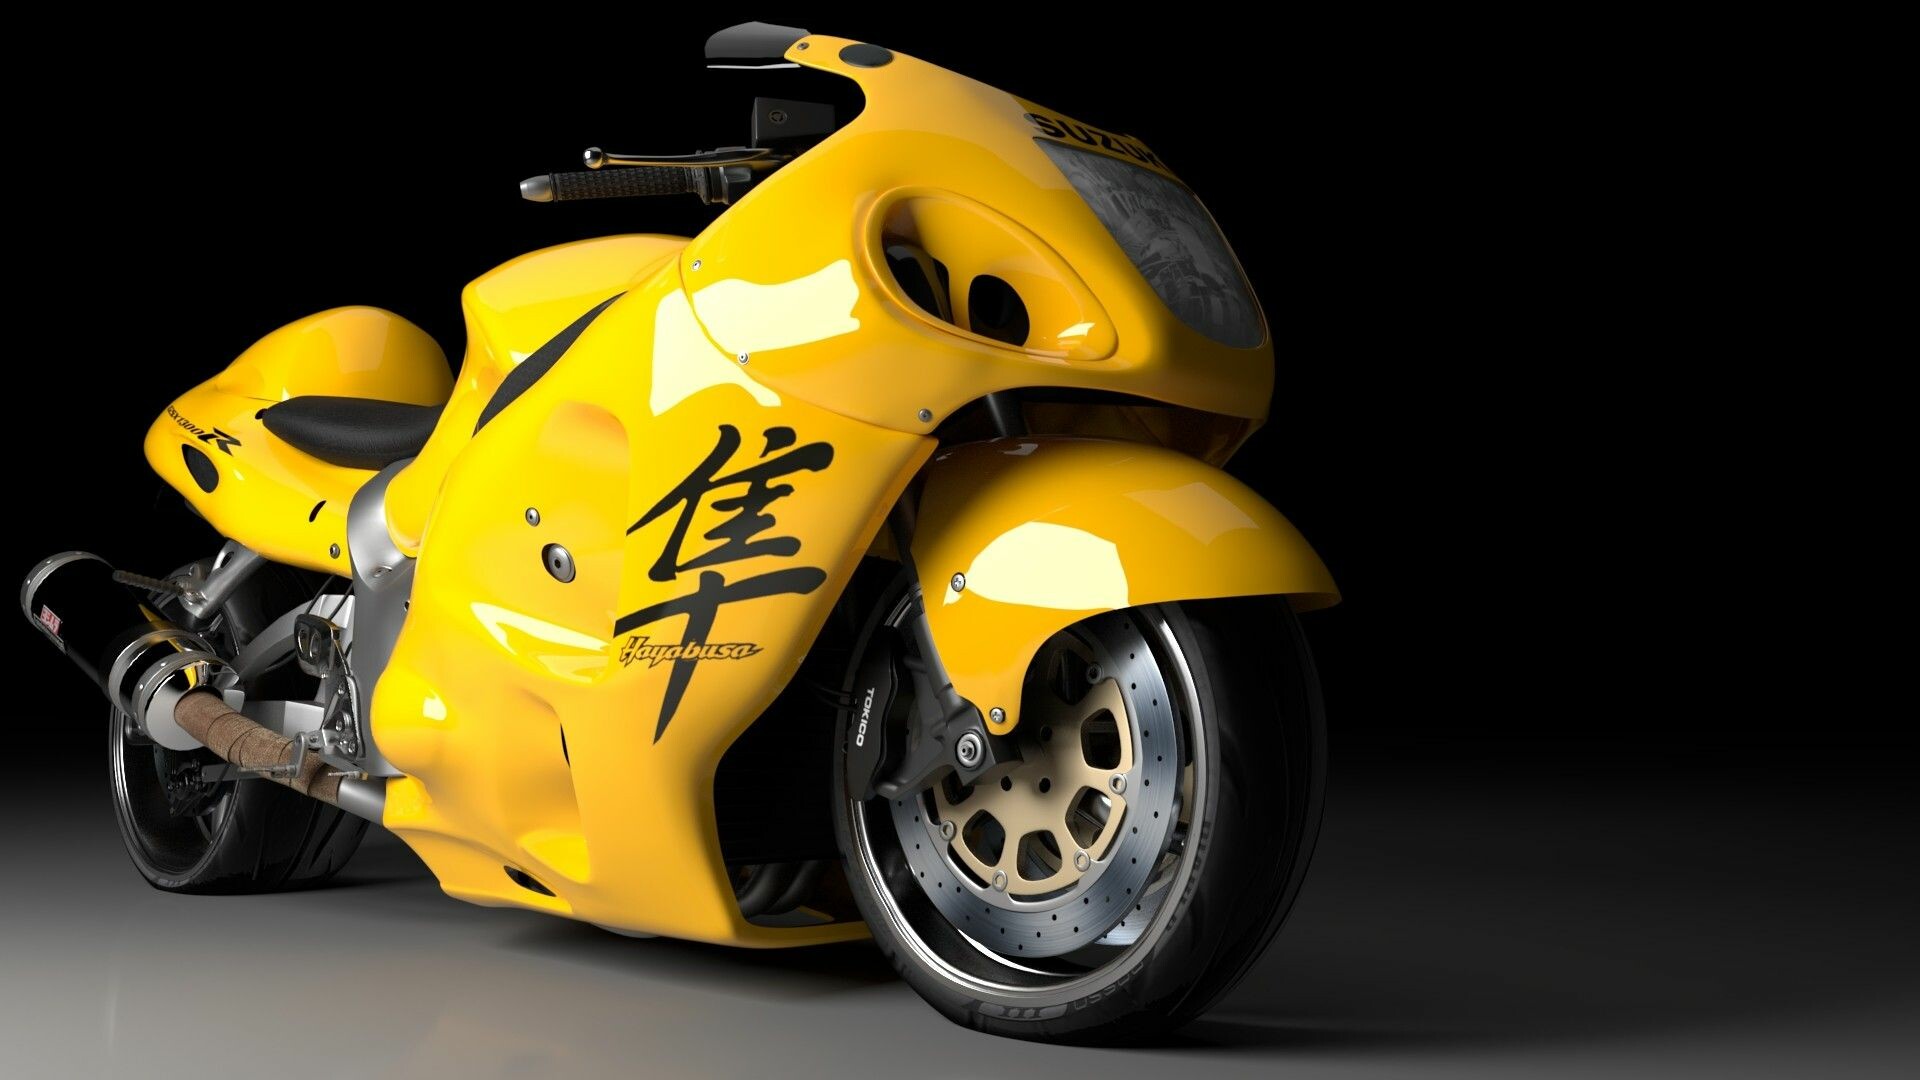 Suzuki Hayabusa: A motorcycle capable of reaching a top speed of 186mph. 1920x1080 Full HD Background.